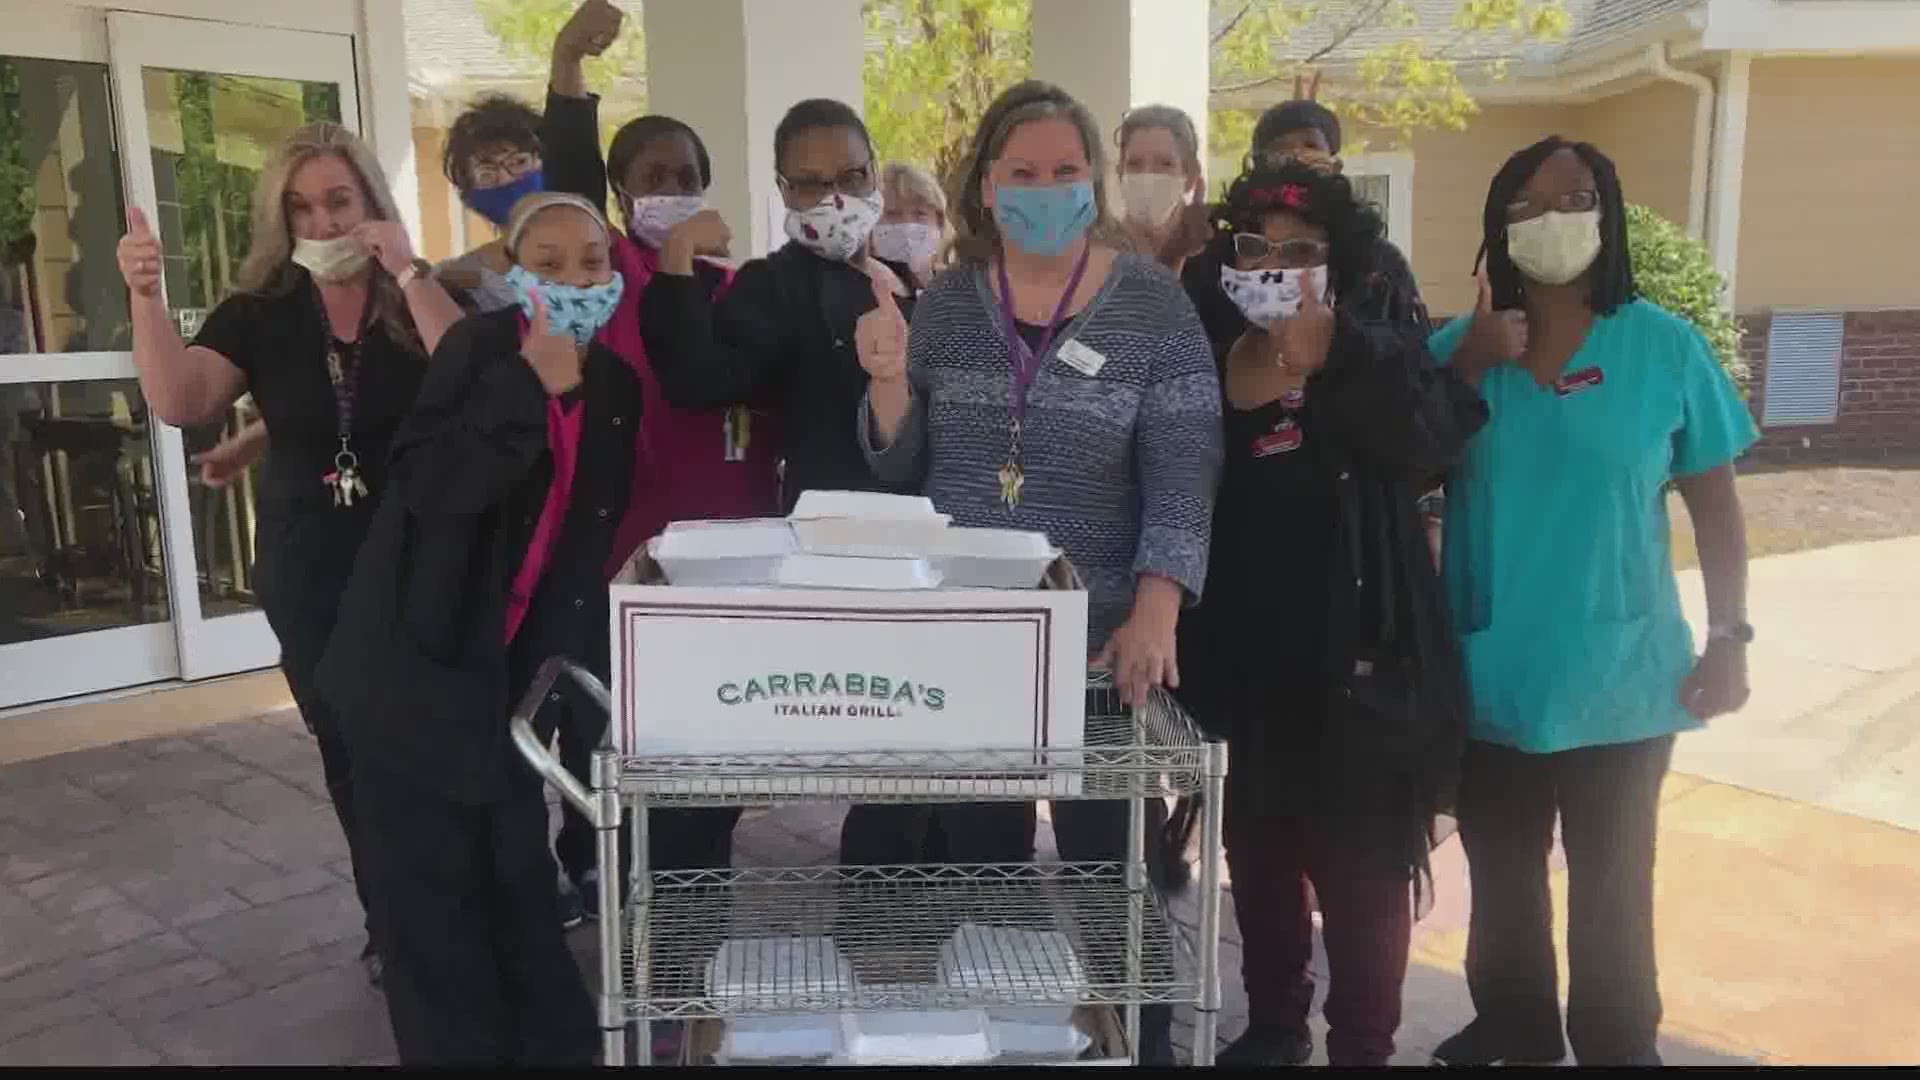 Carrabba's Italian Grill in Huntsville is delivering meals to local first responders, health care workers, and teachers.